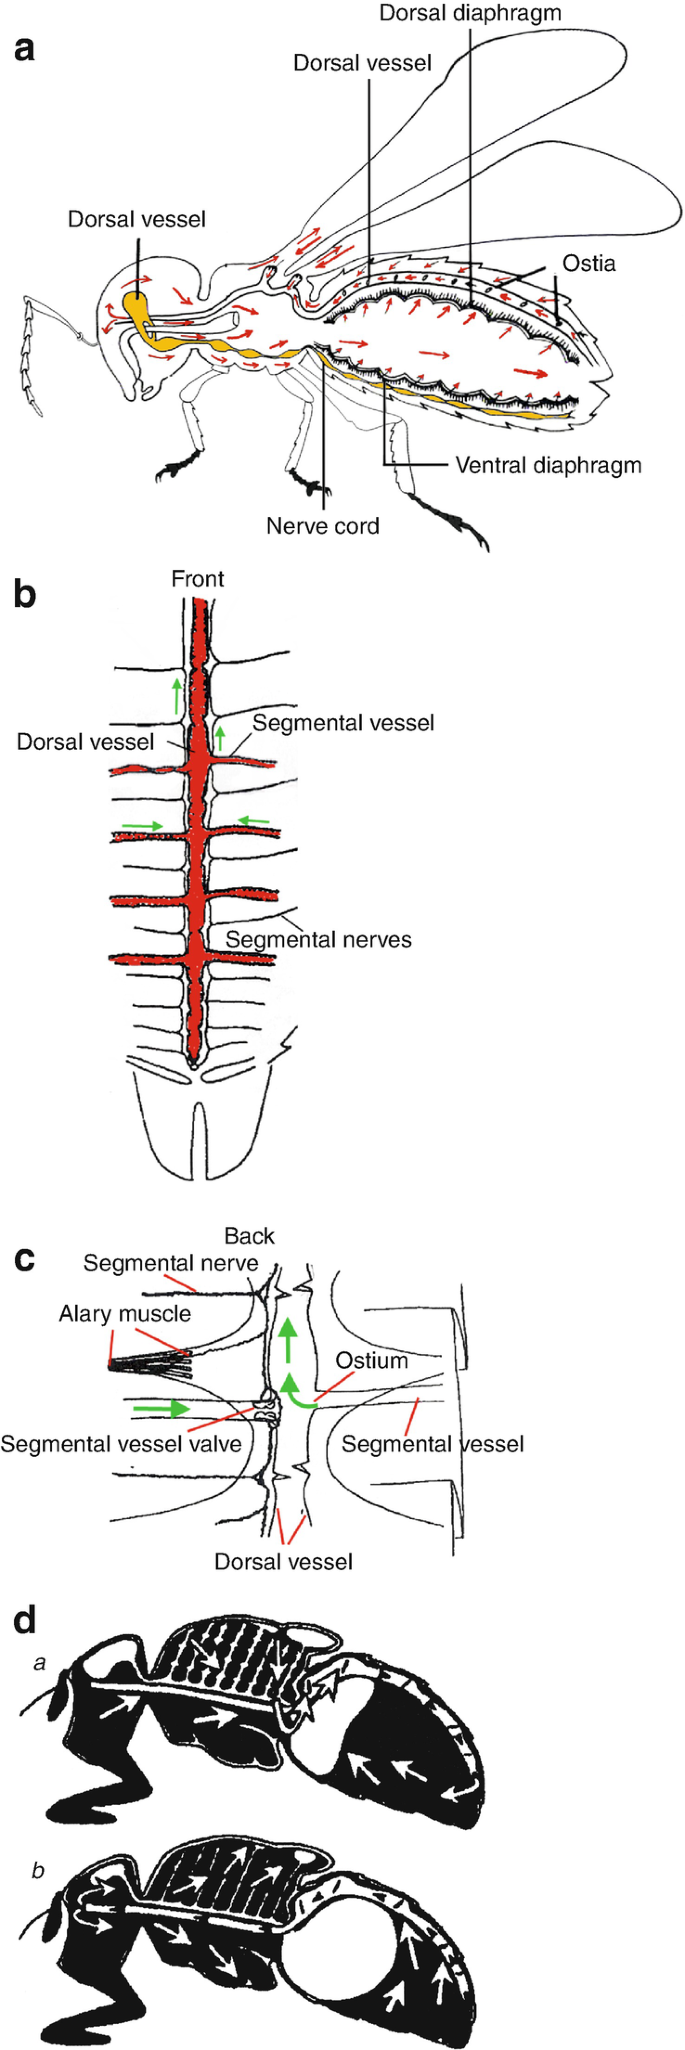 3 Simplified illustration of hemolymph channels in the tibia of a